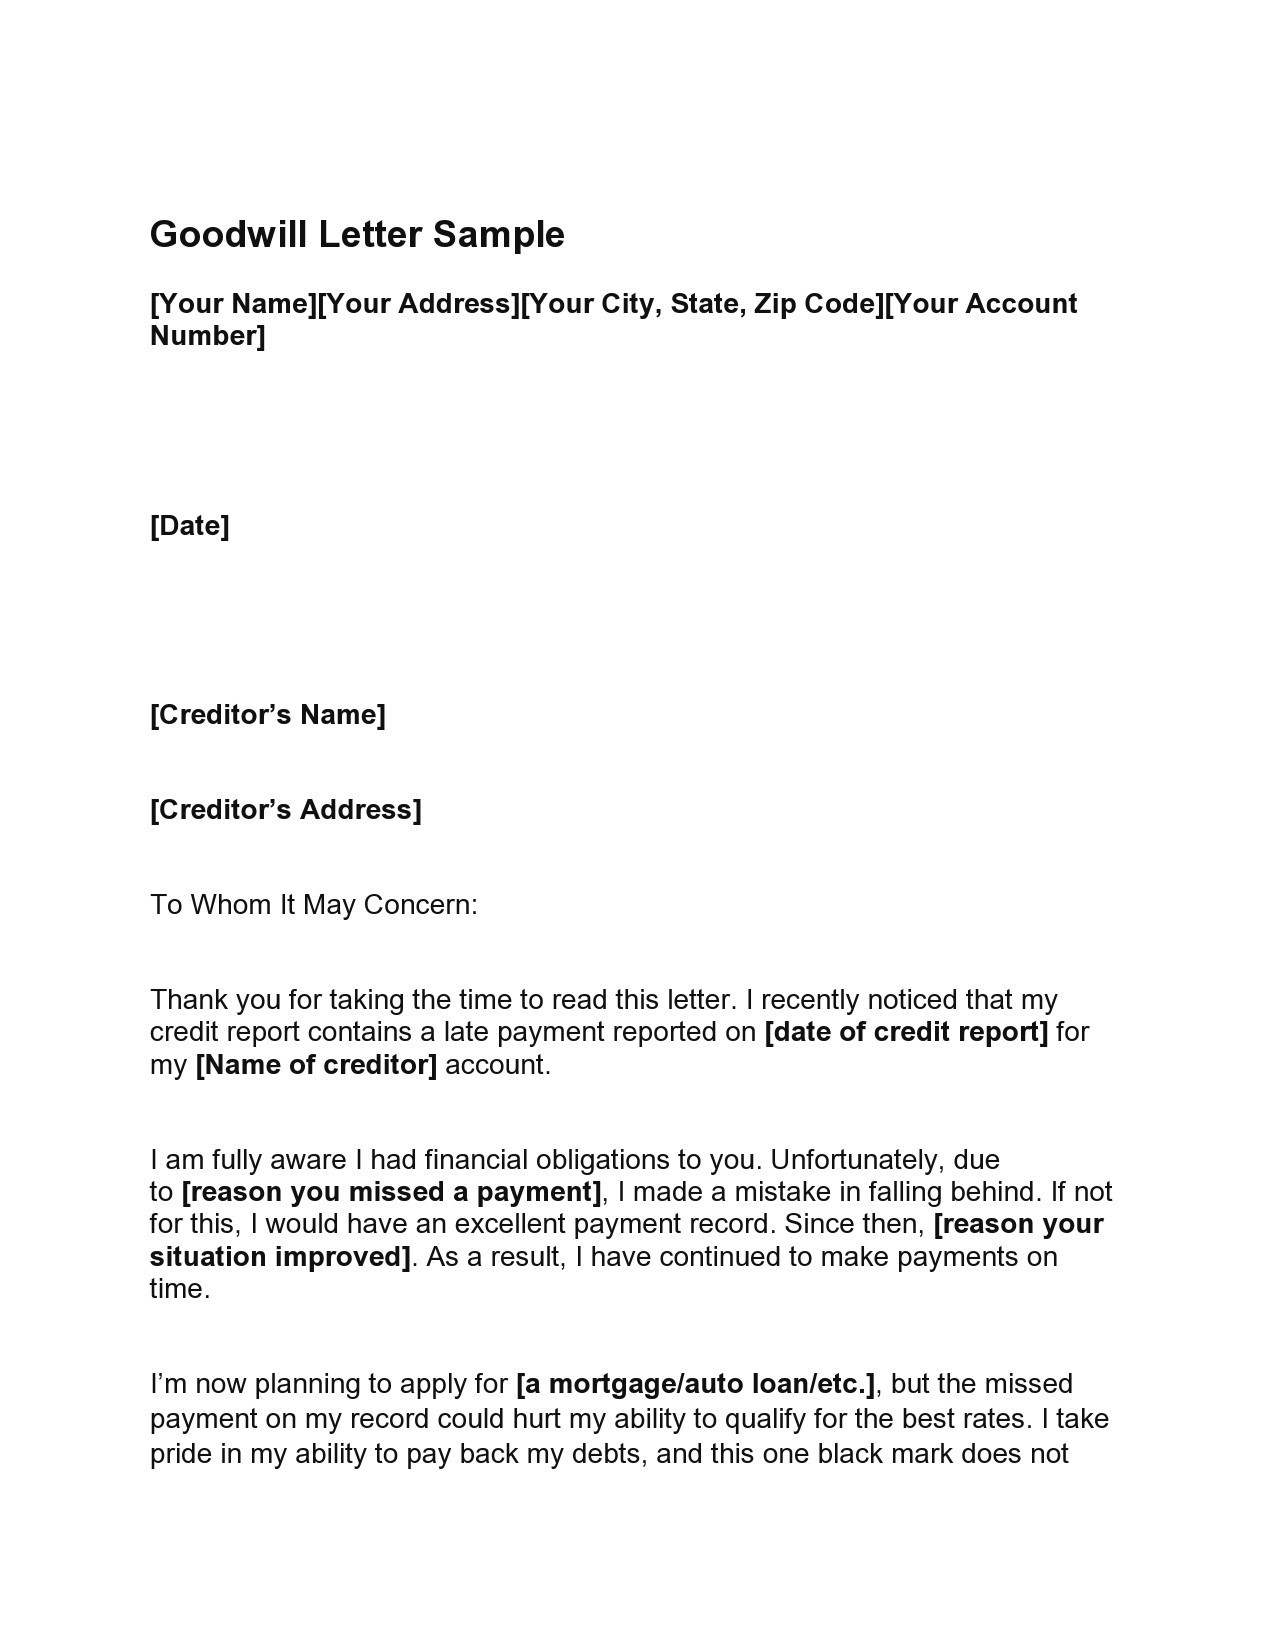 Free goodwill letter template 08